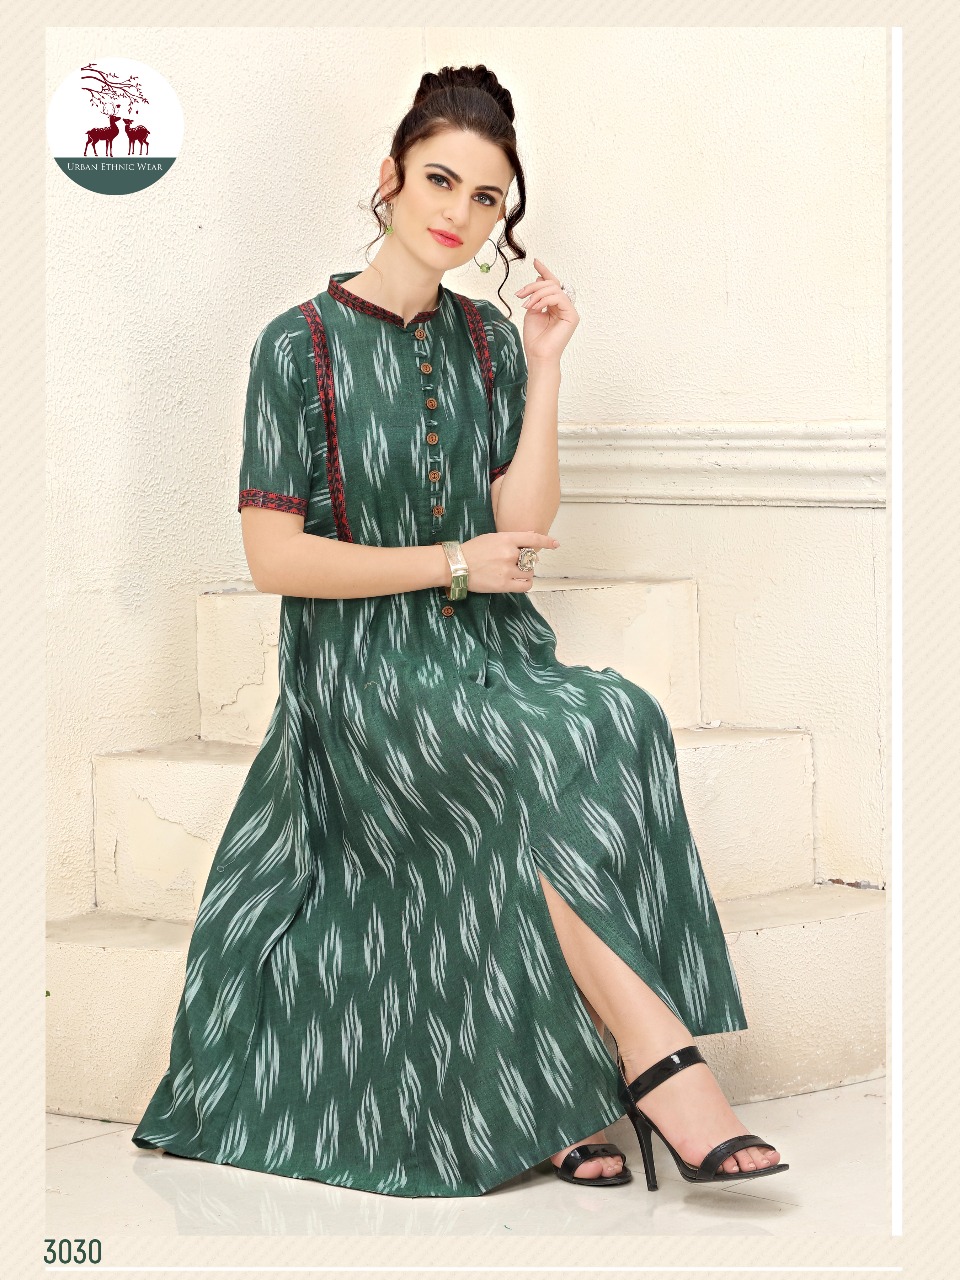 Hand Embroidery Ikat Kurtis Online Shopping for Women at Low Prices